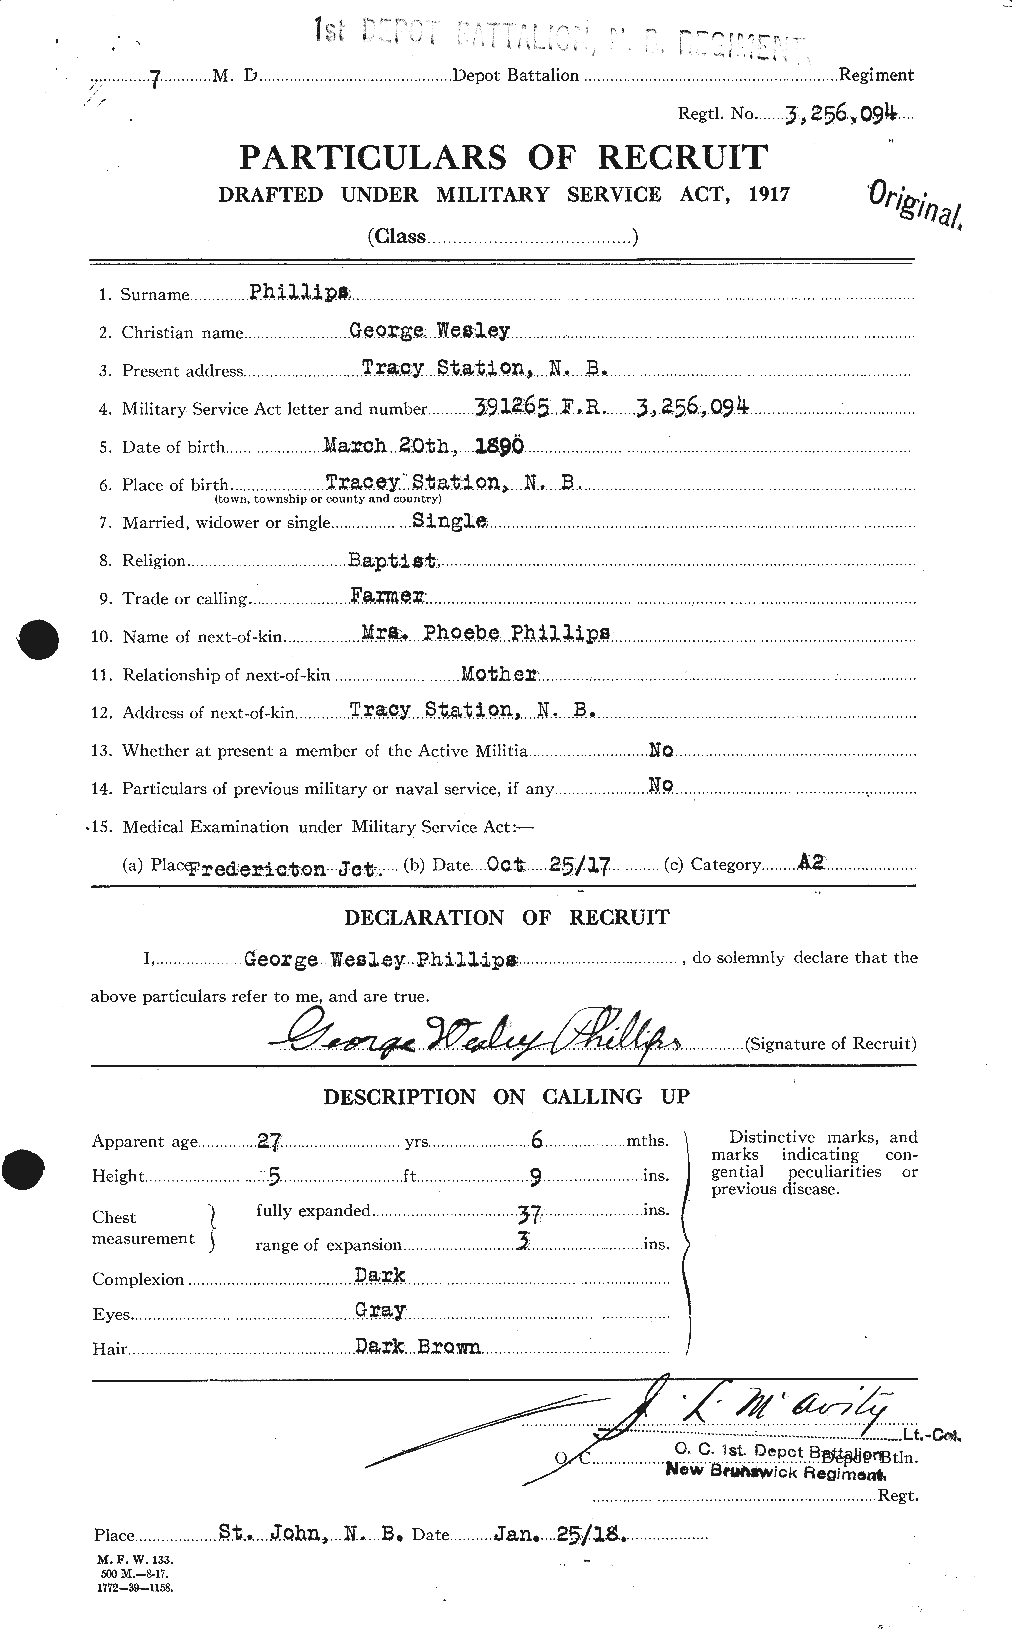 Personnel Records of the First World War - CEF 577539a